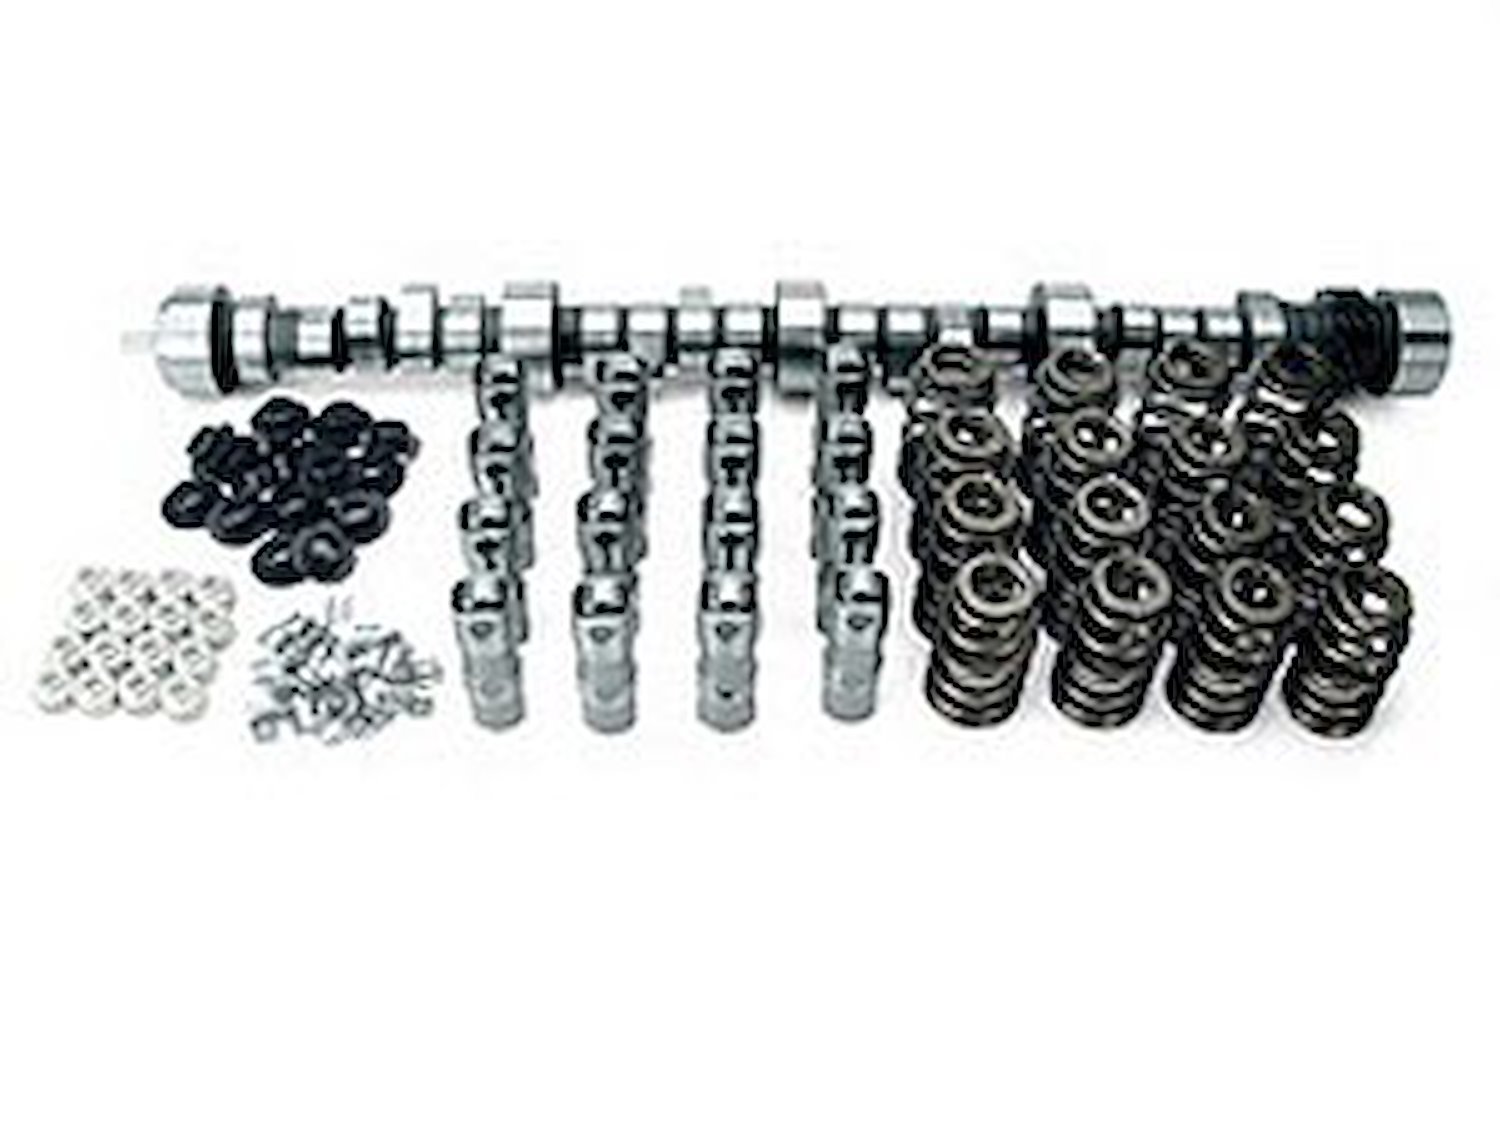 XFI Hydraulic Roller Camshaft Complete Kit GM LT1 & LT4 350ci 1995-97 Lift: .584"/.579" With 1.6 Rockers